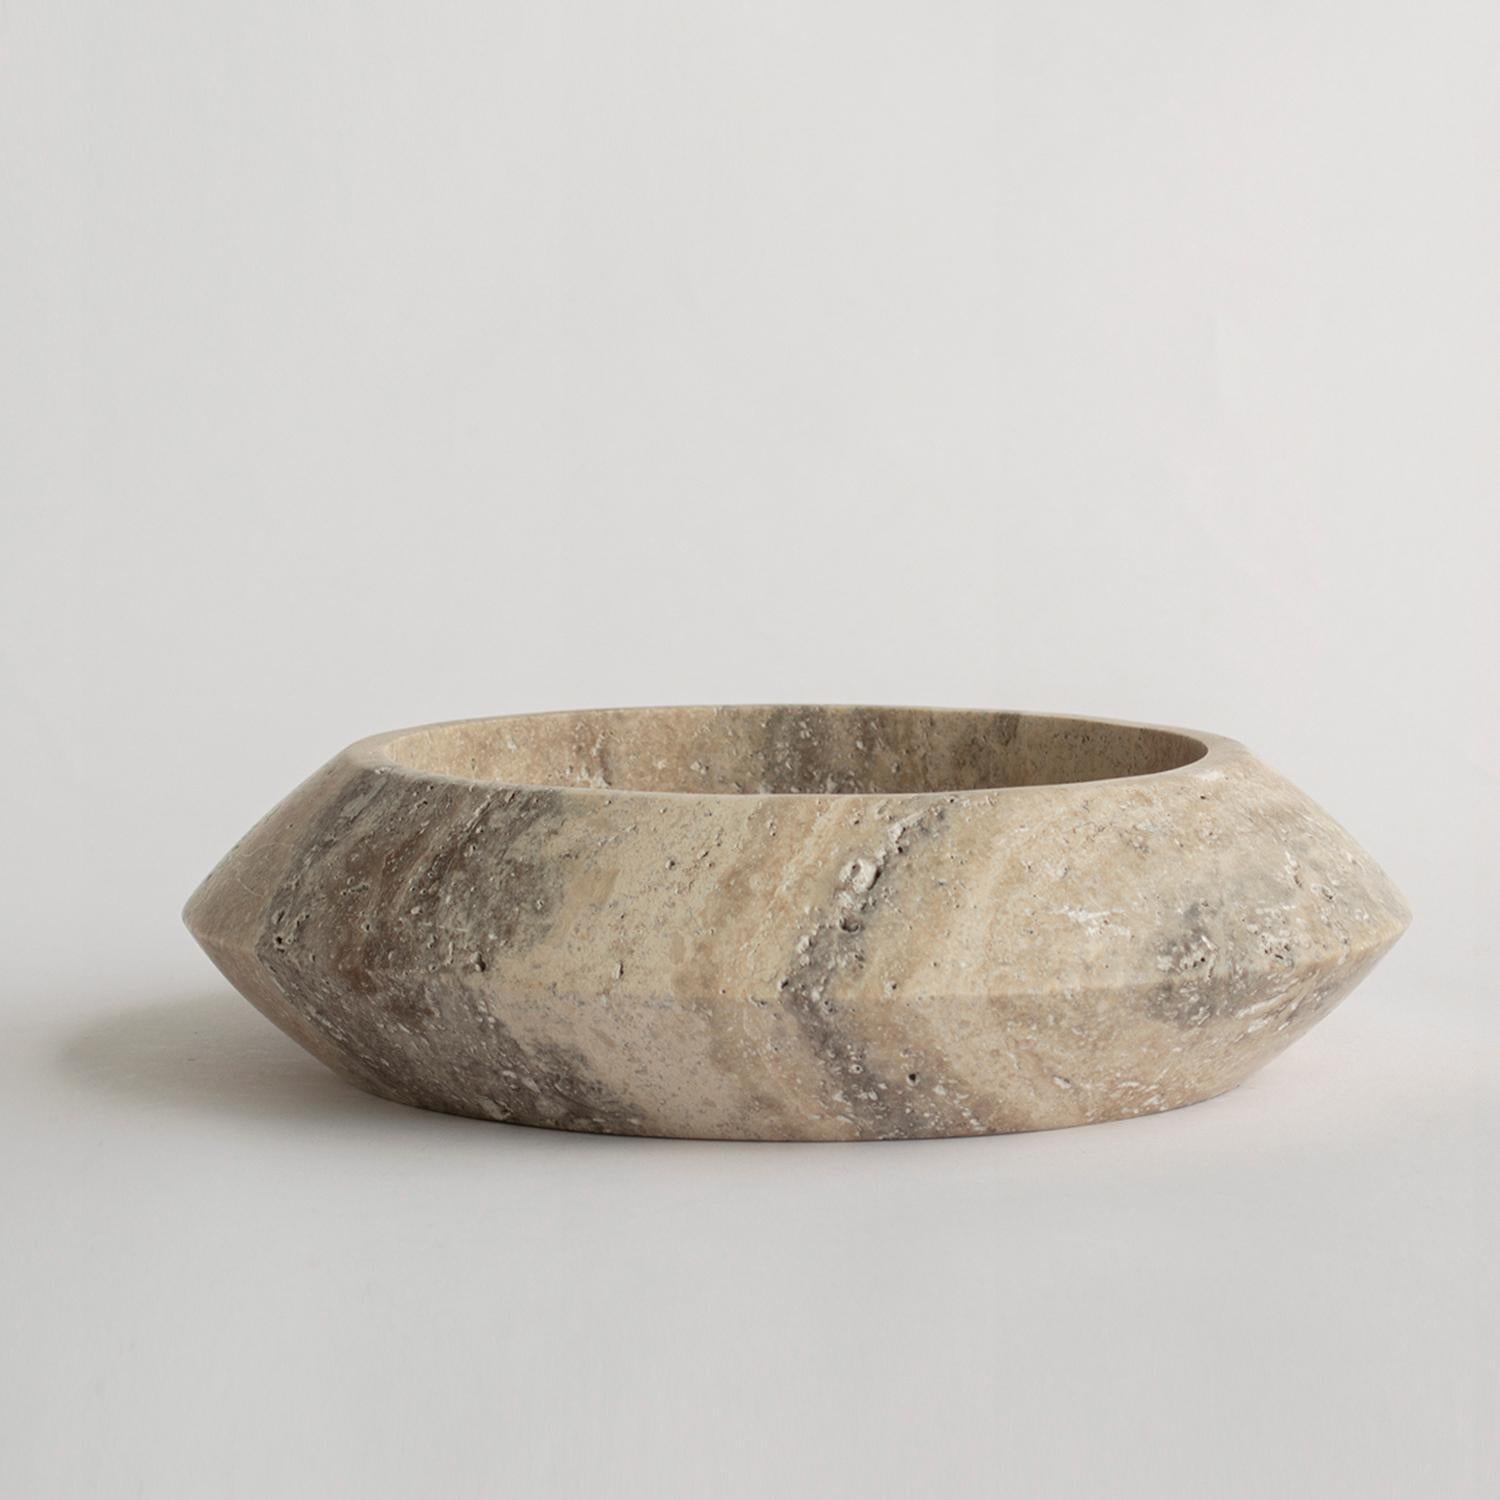 Stunning, aesthetic, timeless are words that can be used to describe this elegant and modern travertine Eclipse bowl from Kiwano. Expertly crafted and finished by hand, our travertine bowls are a study in sculptural simplicity. Natural variations in